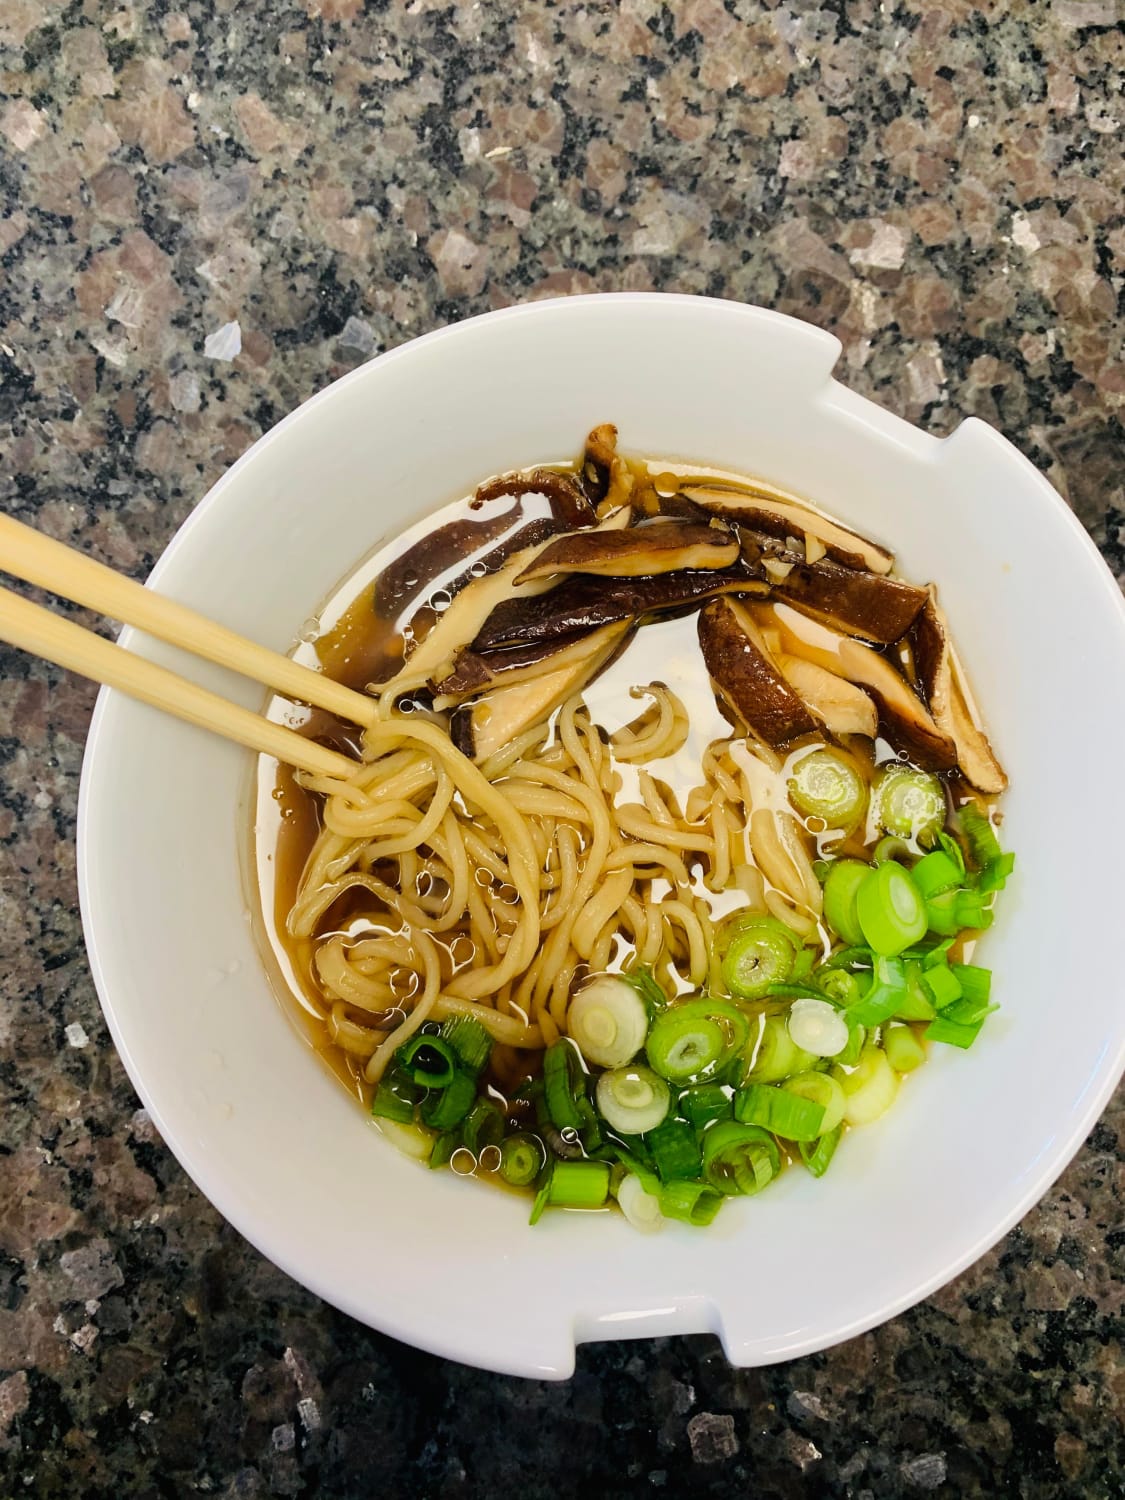 My first post here and second attempt at homemade ramen!- Shoyu with scallion oil (Vegan)